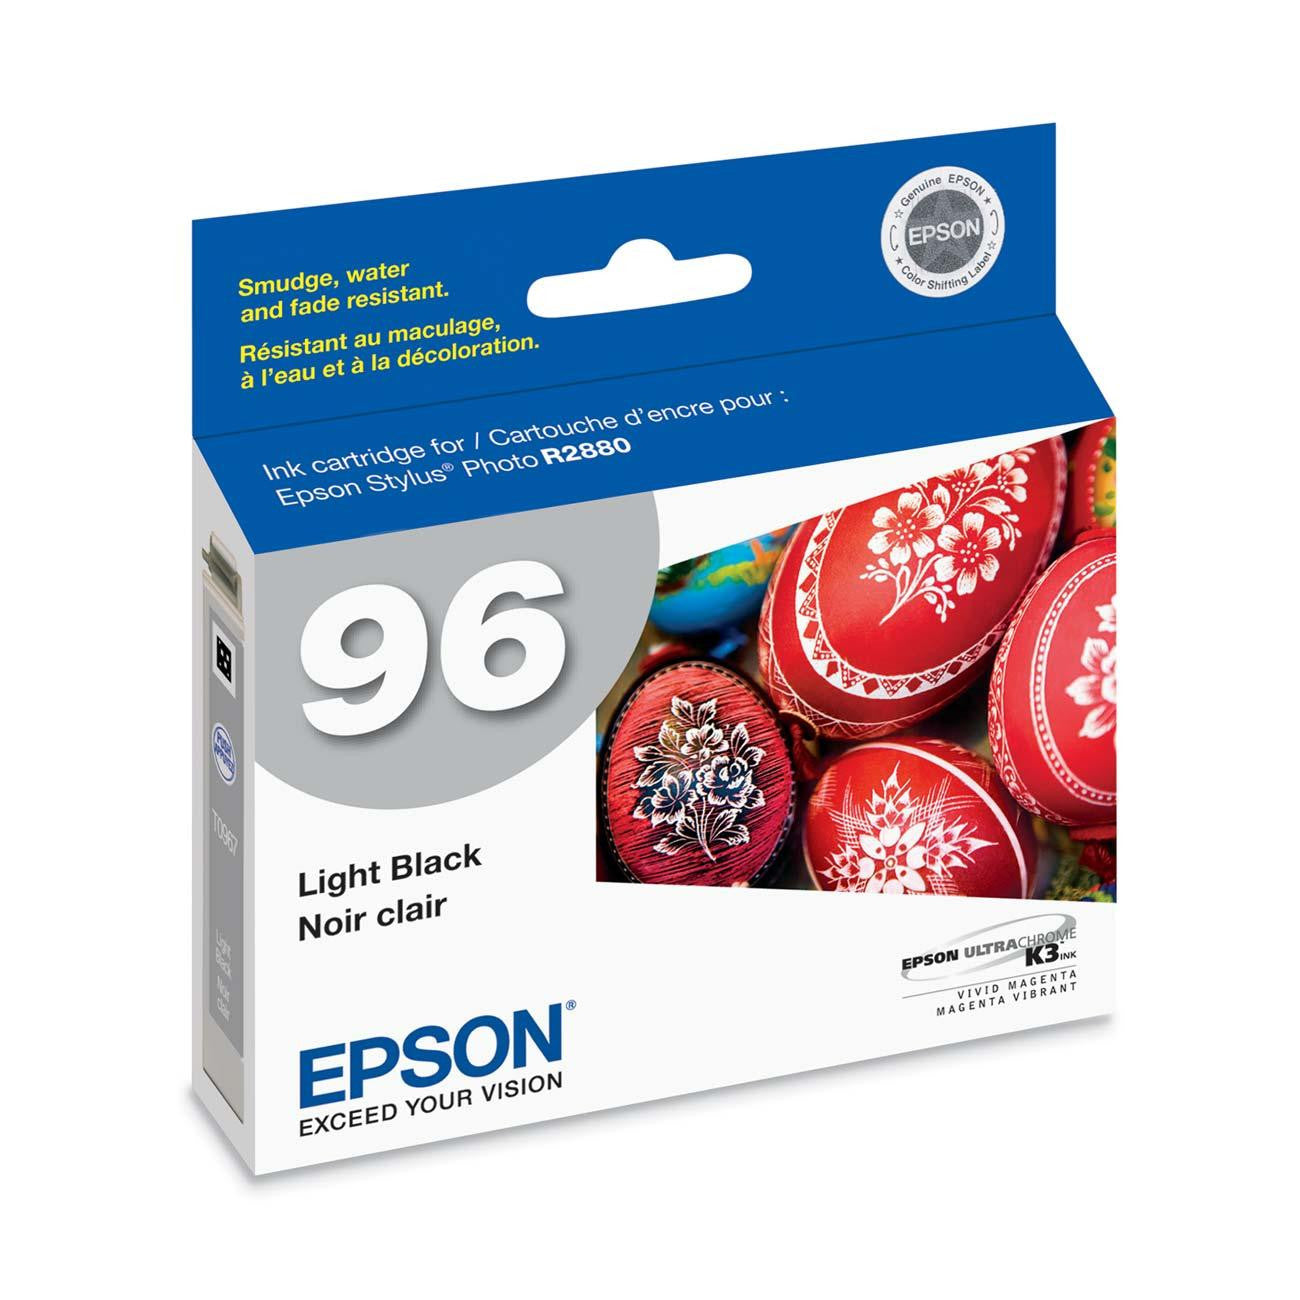 Epson T096720 R2880 Light Black Ink Cartridge (96), printers ink small format, Epson - Pictureline 